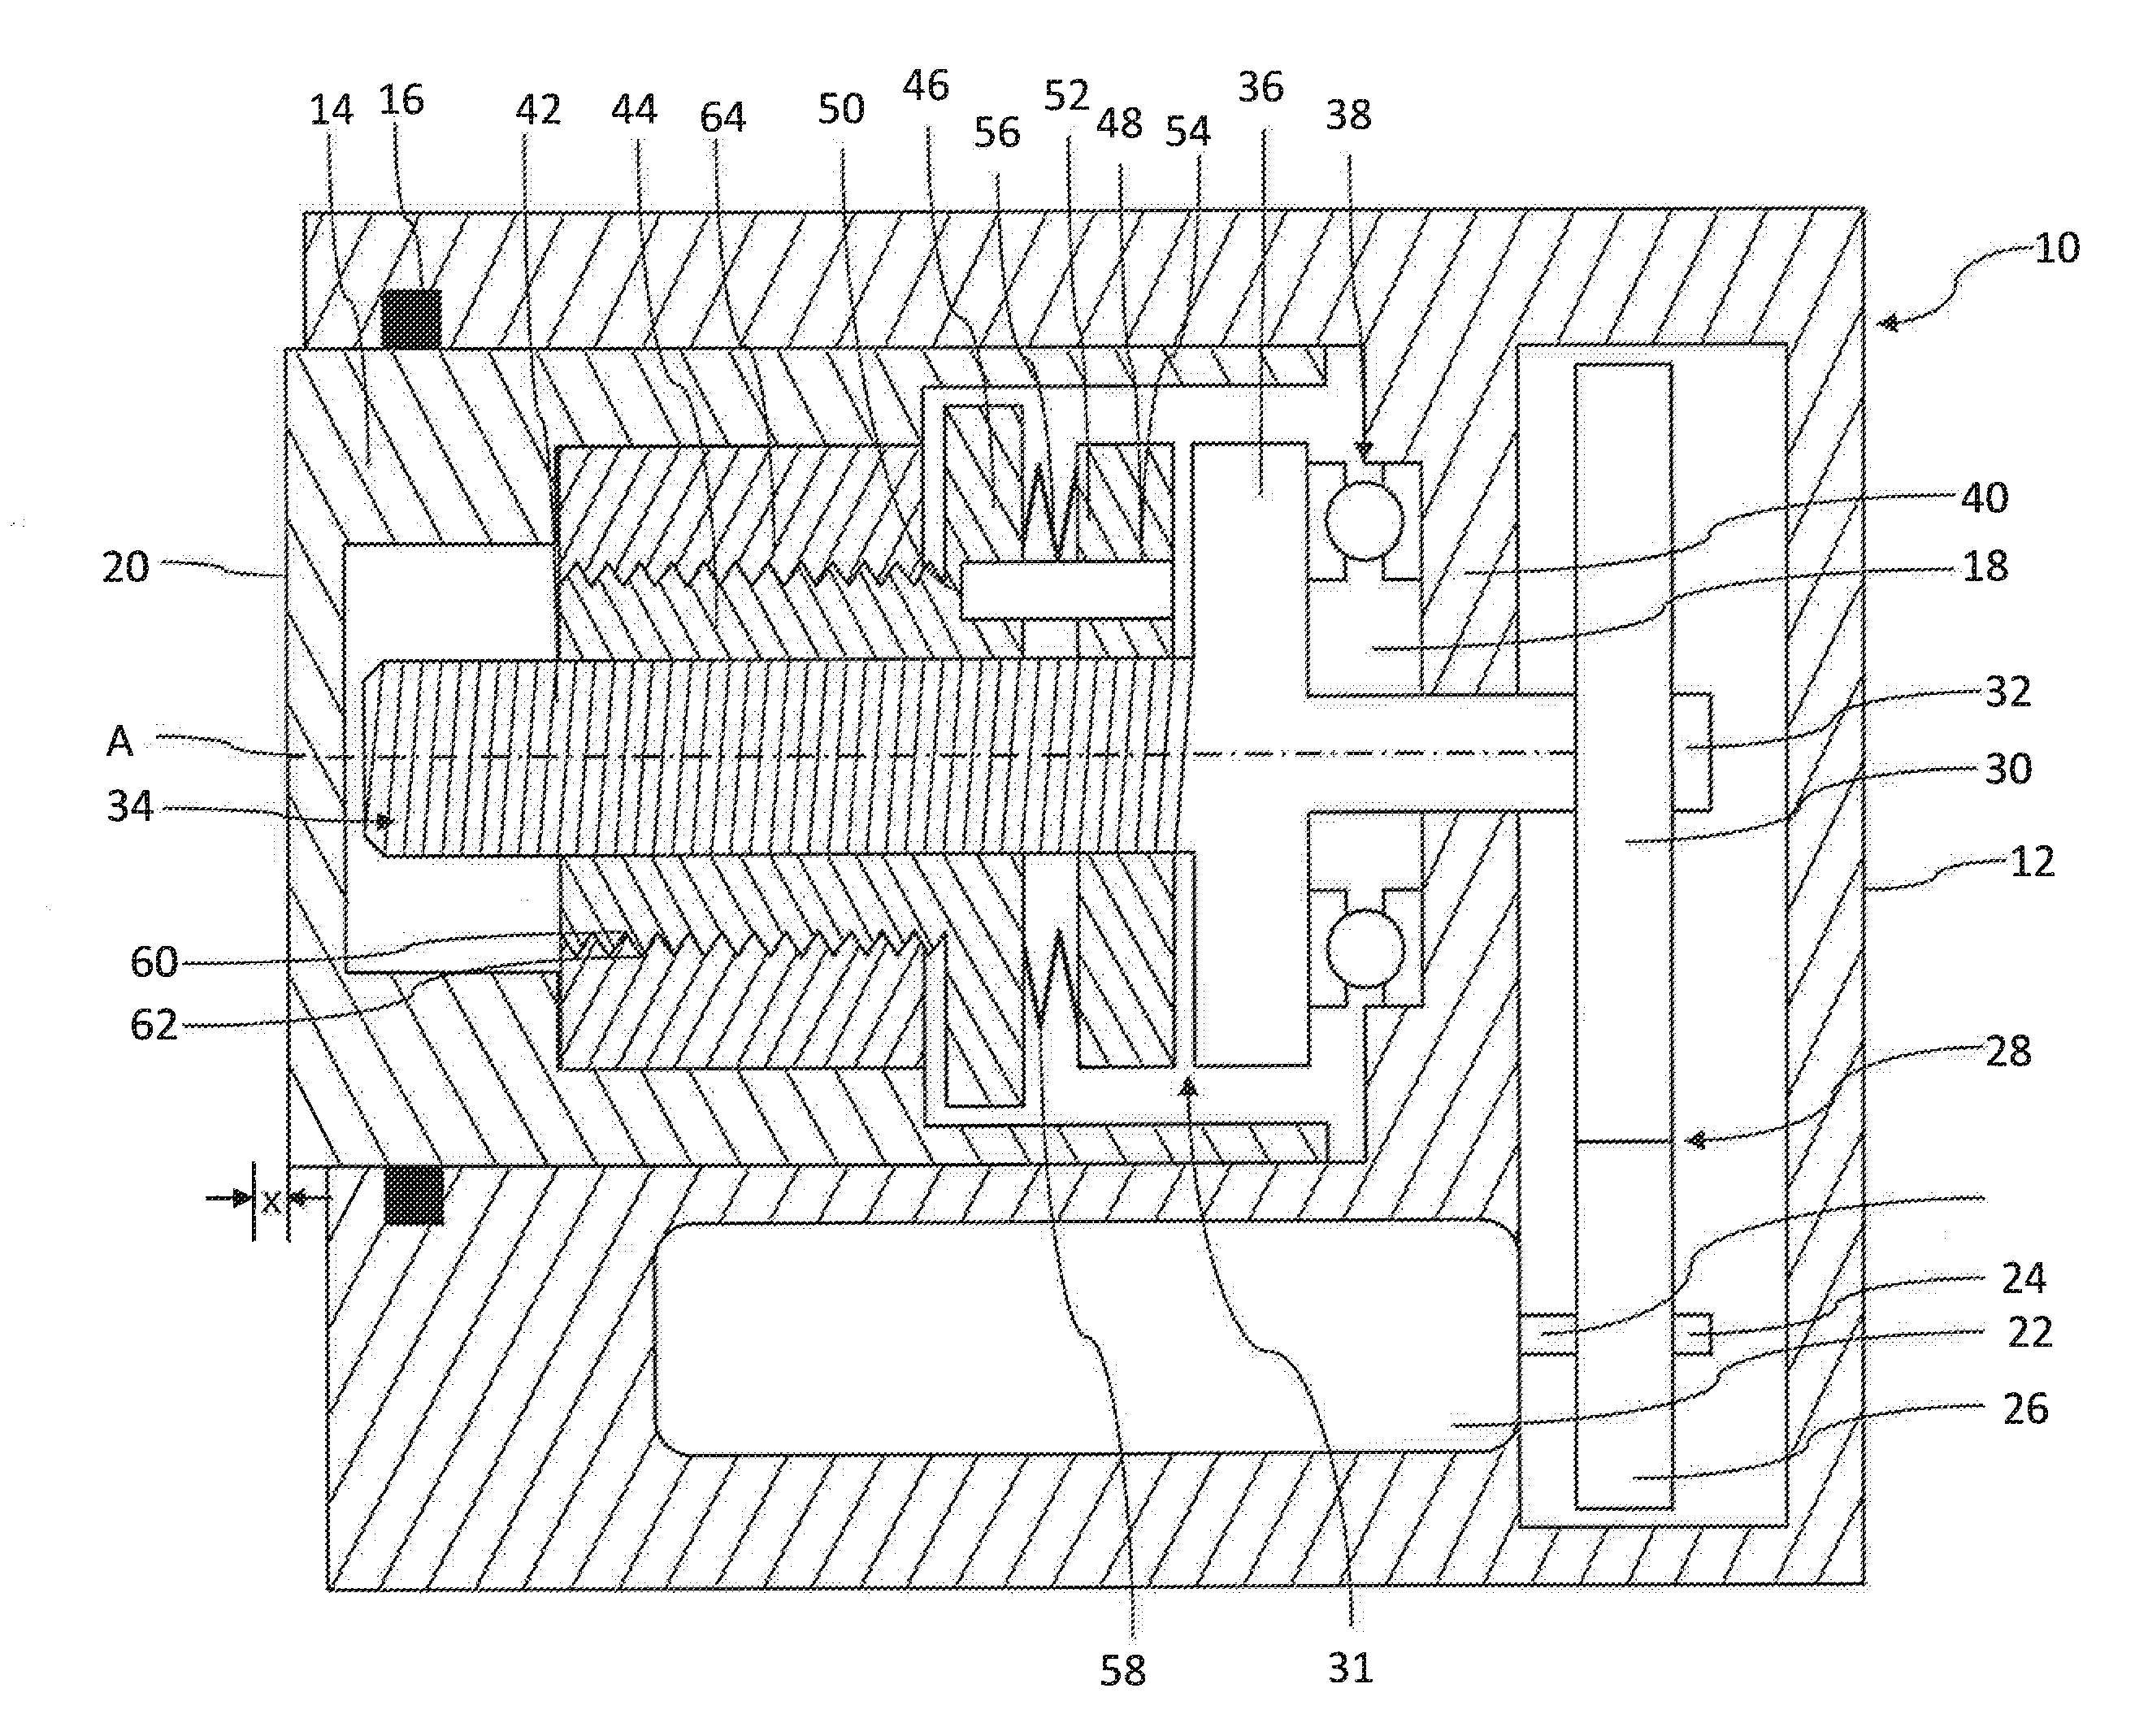 Motor Vehicle Brake, In Particular A Motor Vehicle Brake That Can Be Actuated In A Combined Hydraulic And Electromechanical Manner, Comprising A Multi-Stage Spindle